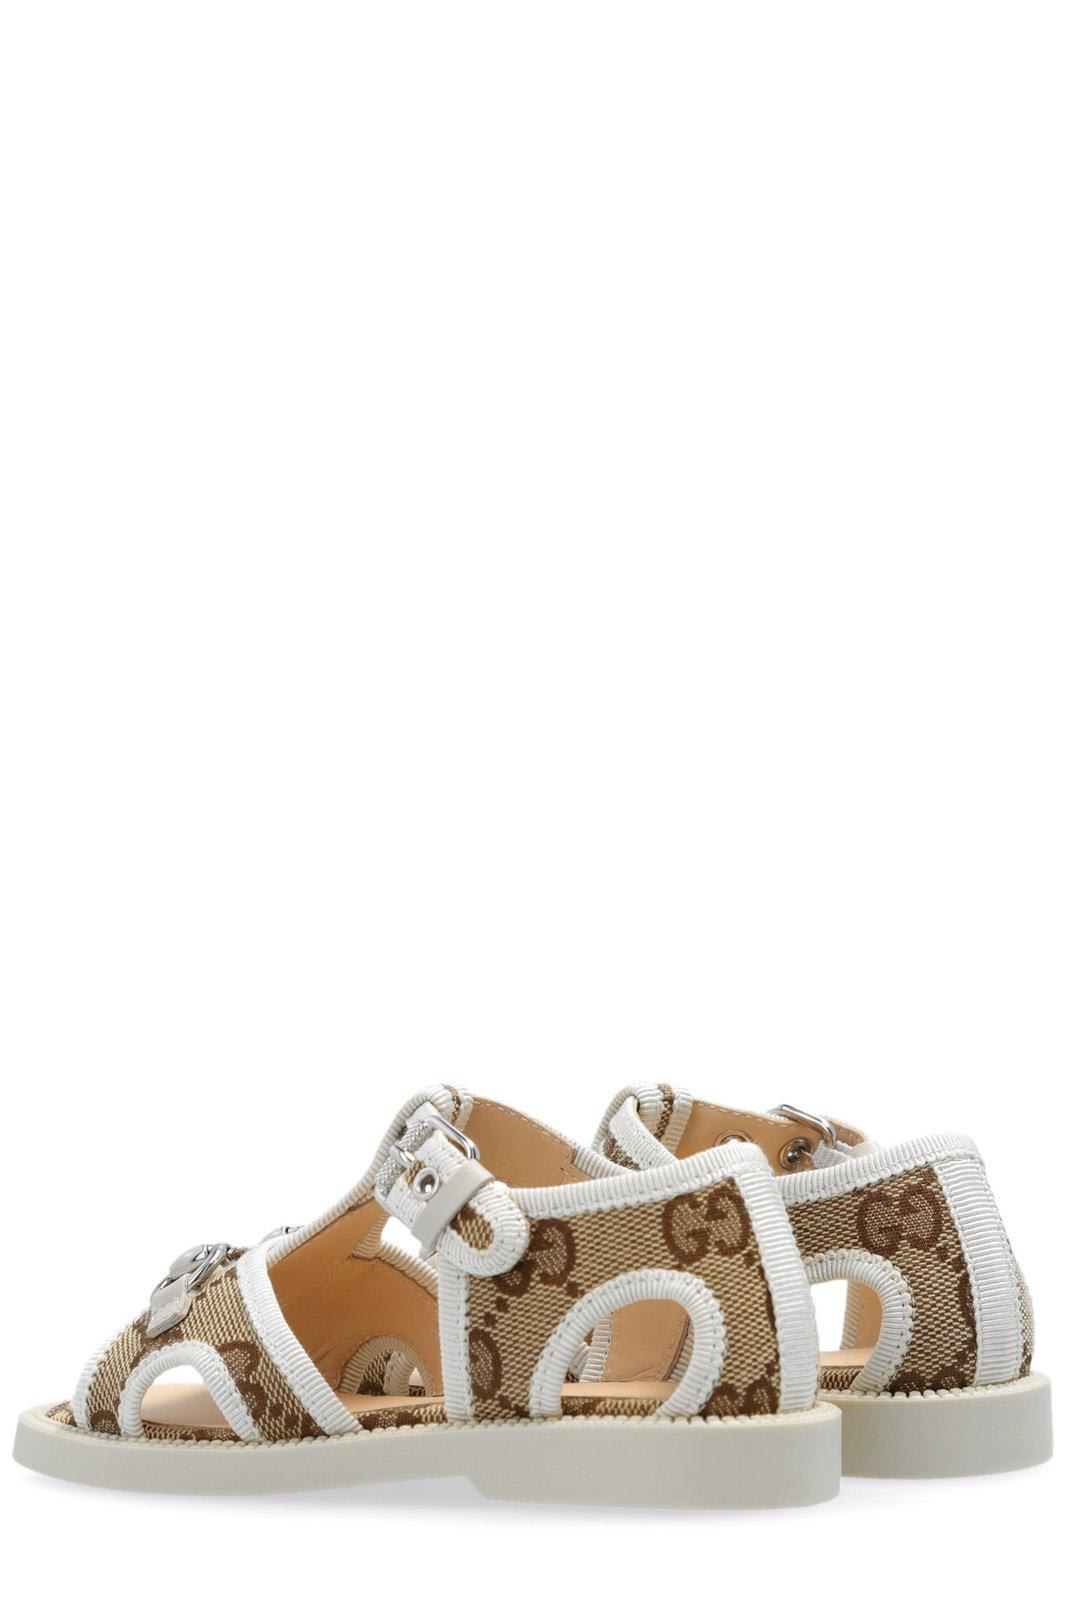 Shop Gucci Buckled Open Toe Sandals In White